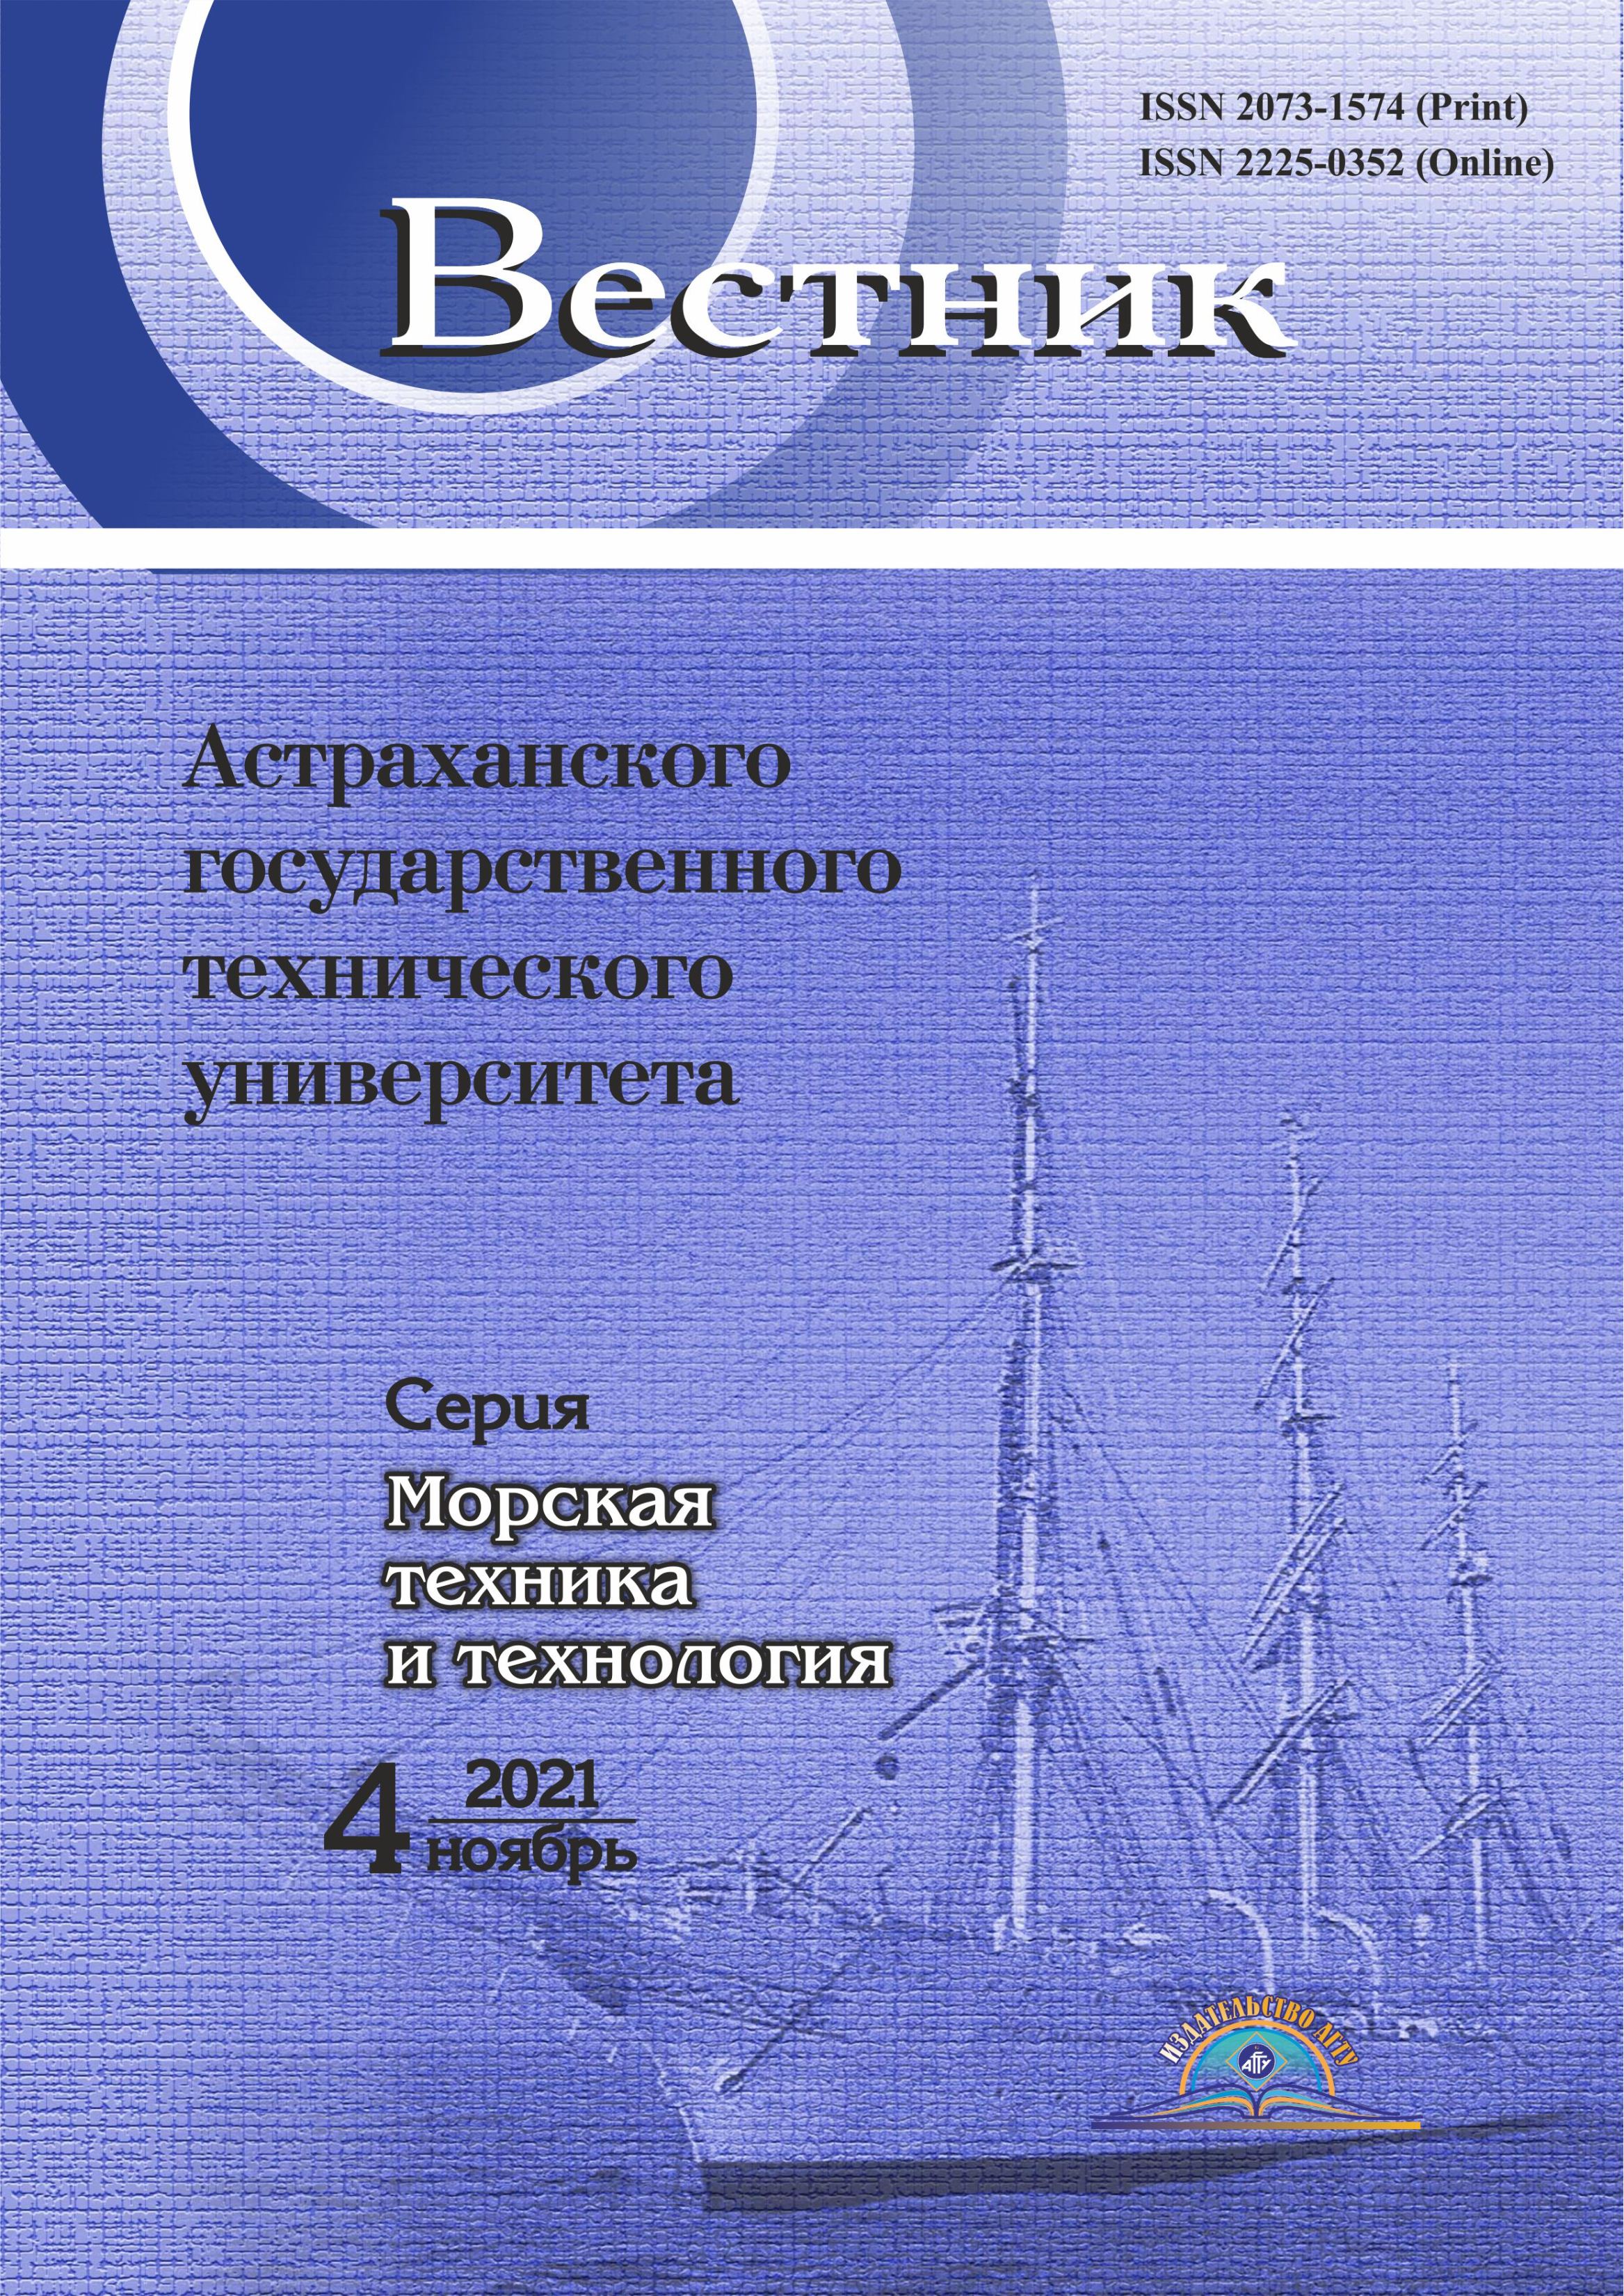                         Ship course control system with compensation of external disturbance on steering gear
            